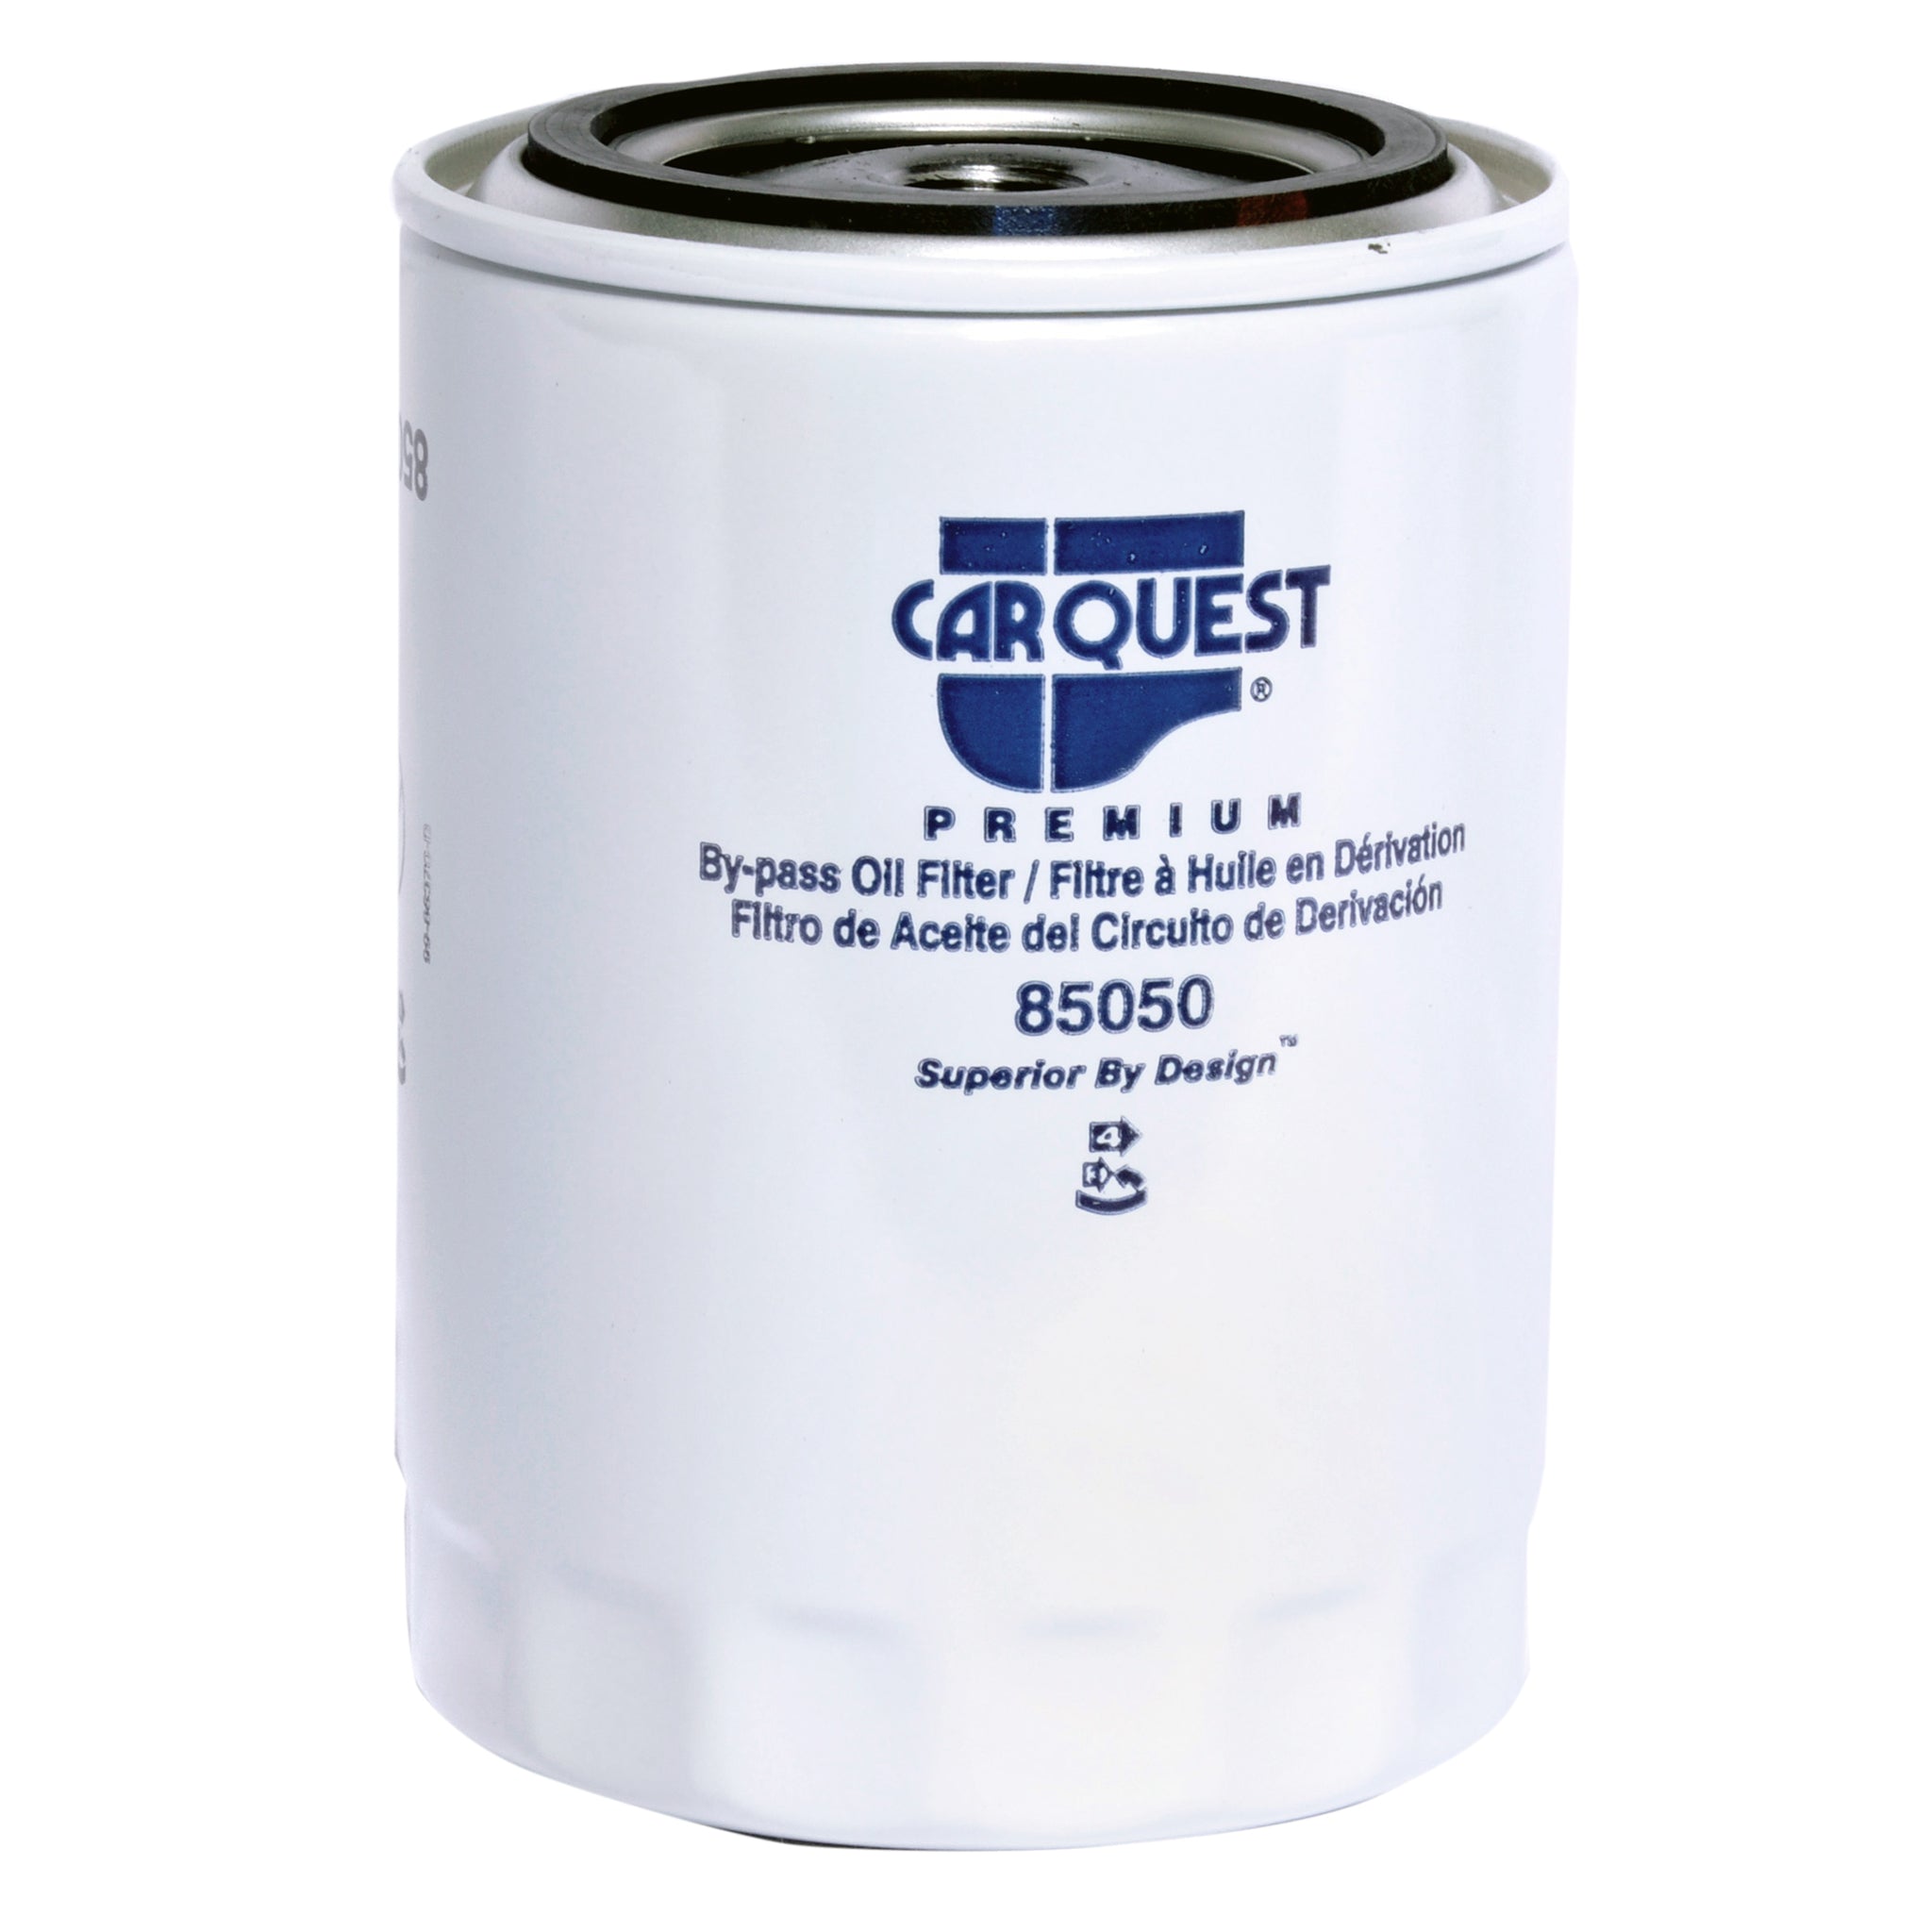 Carquest 10 Micron Bypass Engine Oil Filter